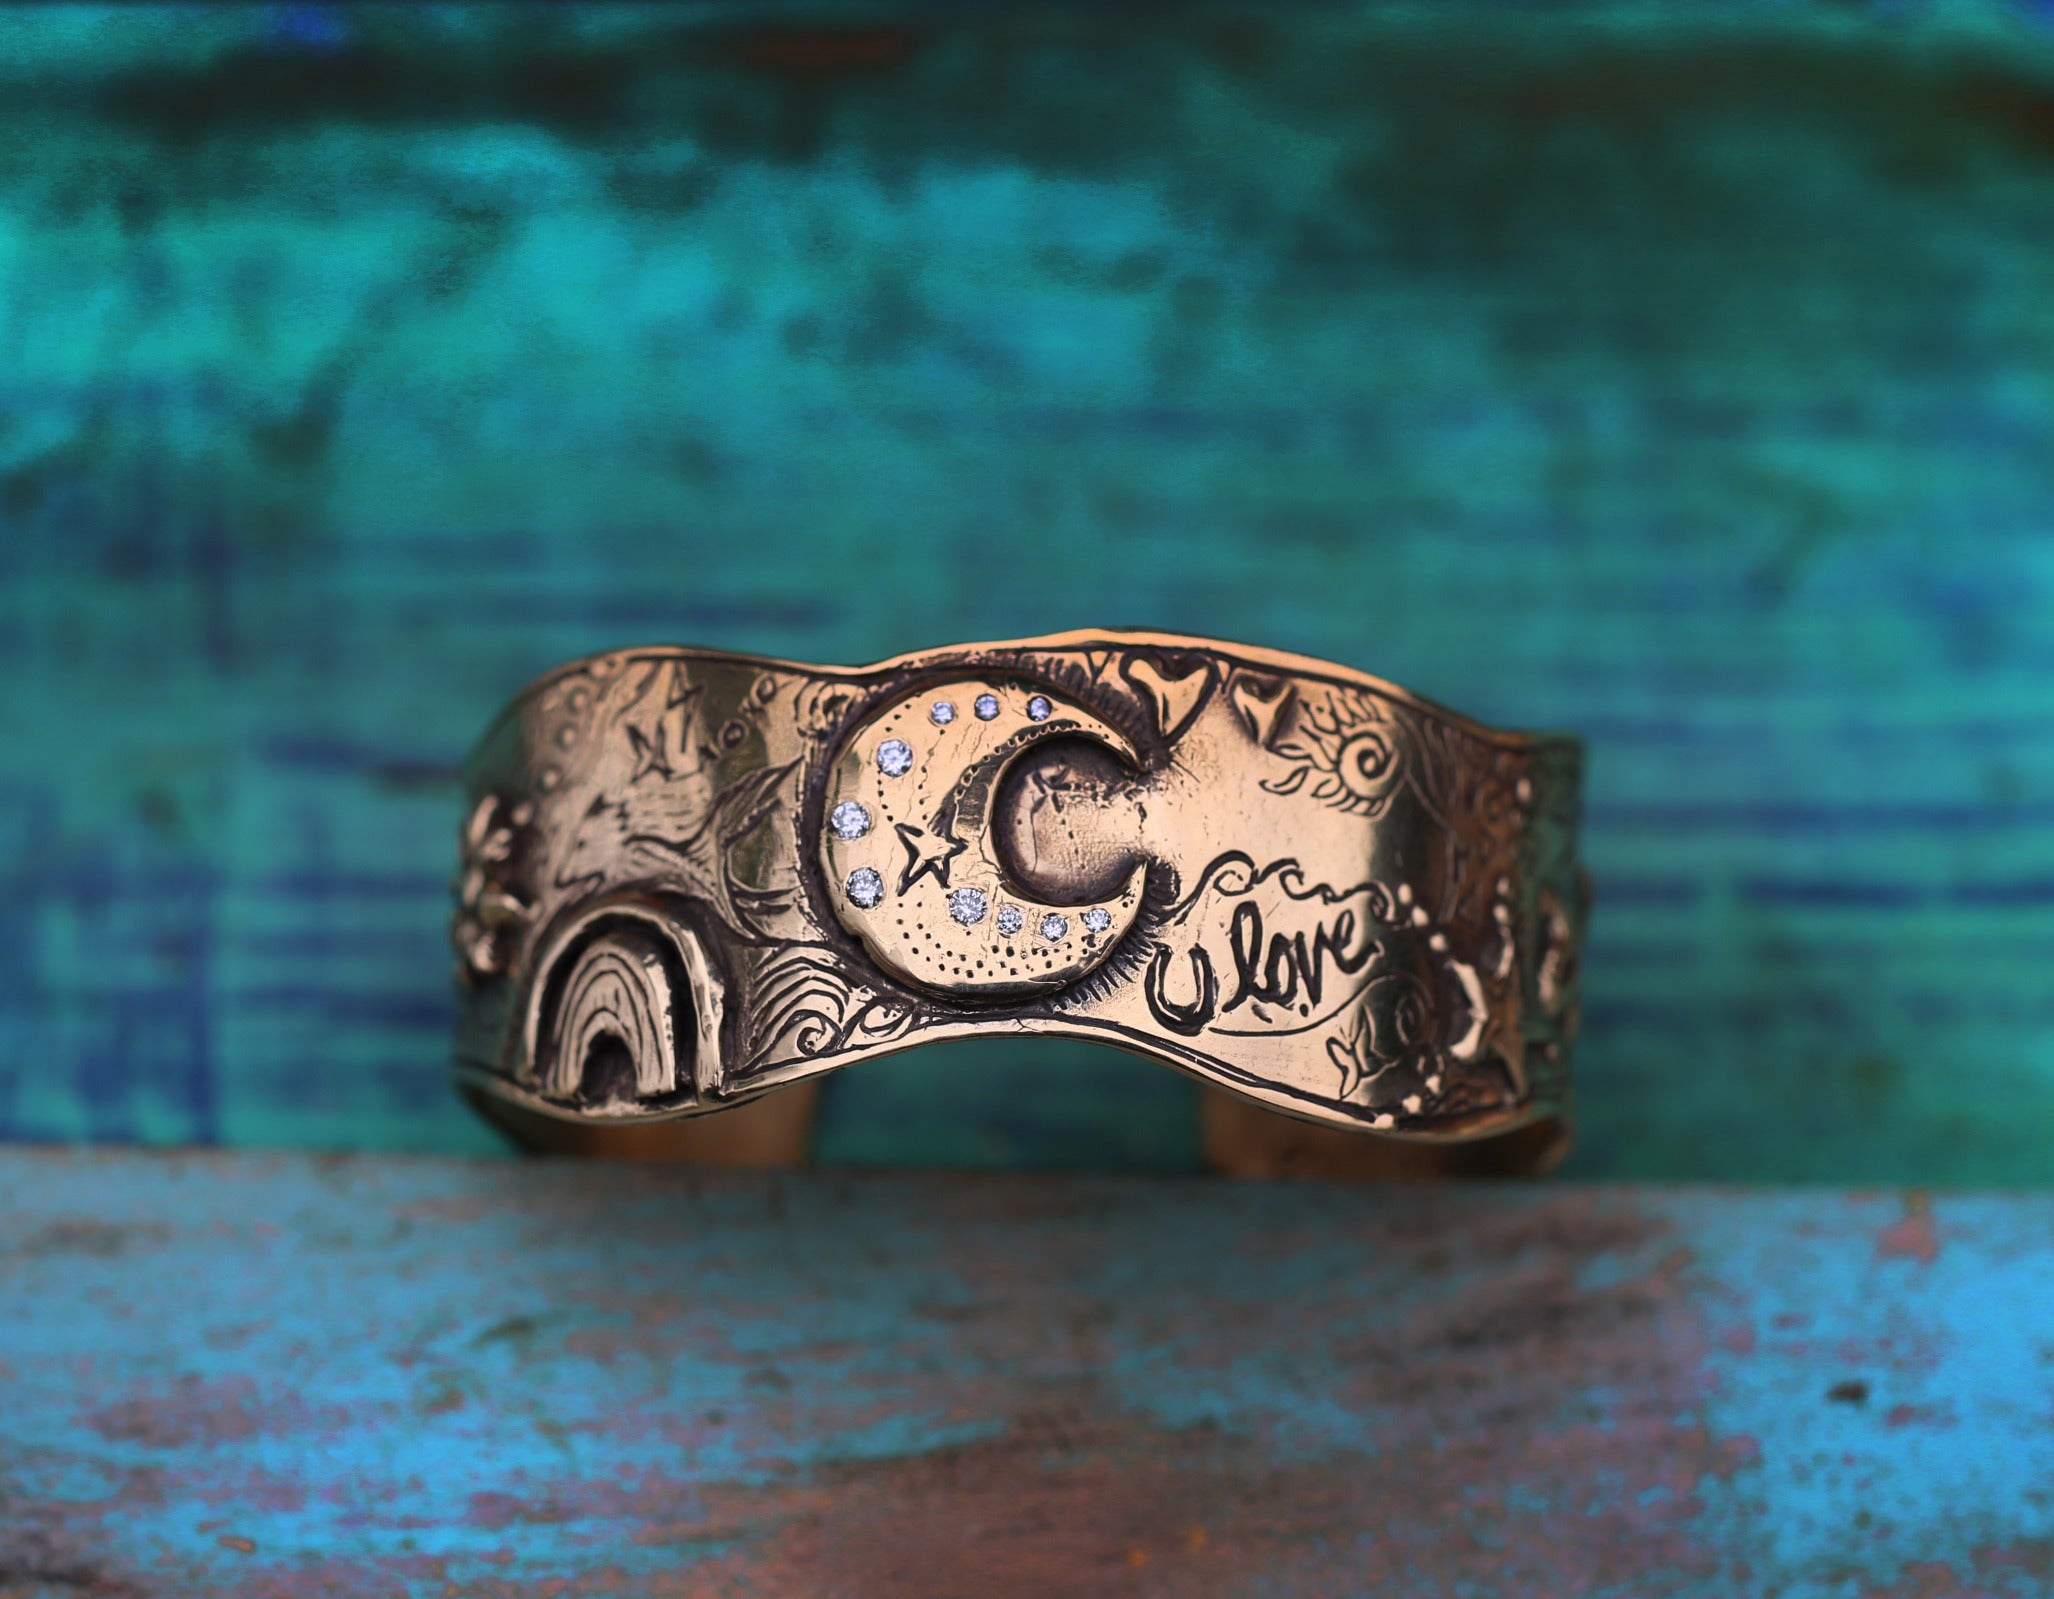 Sparkle Under The Moon With Love Cuff